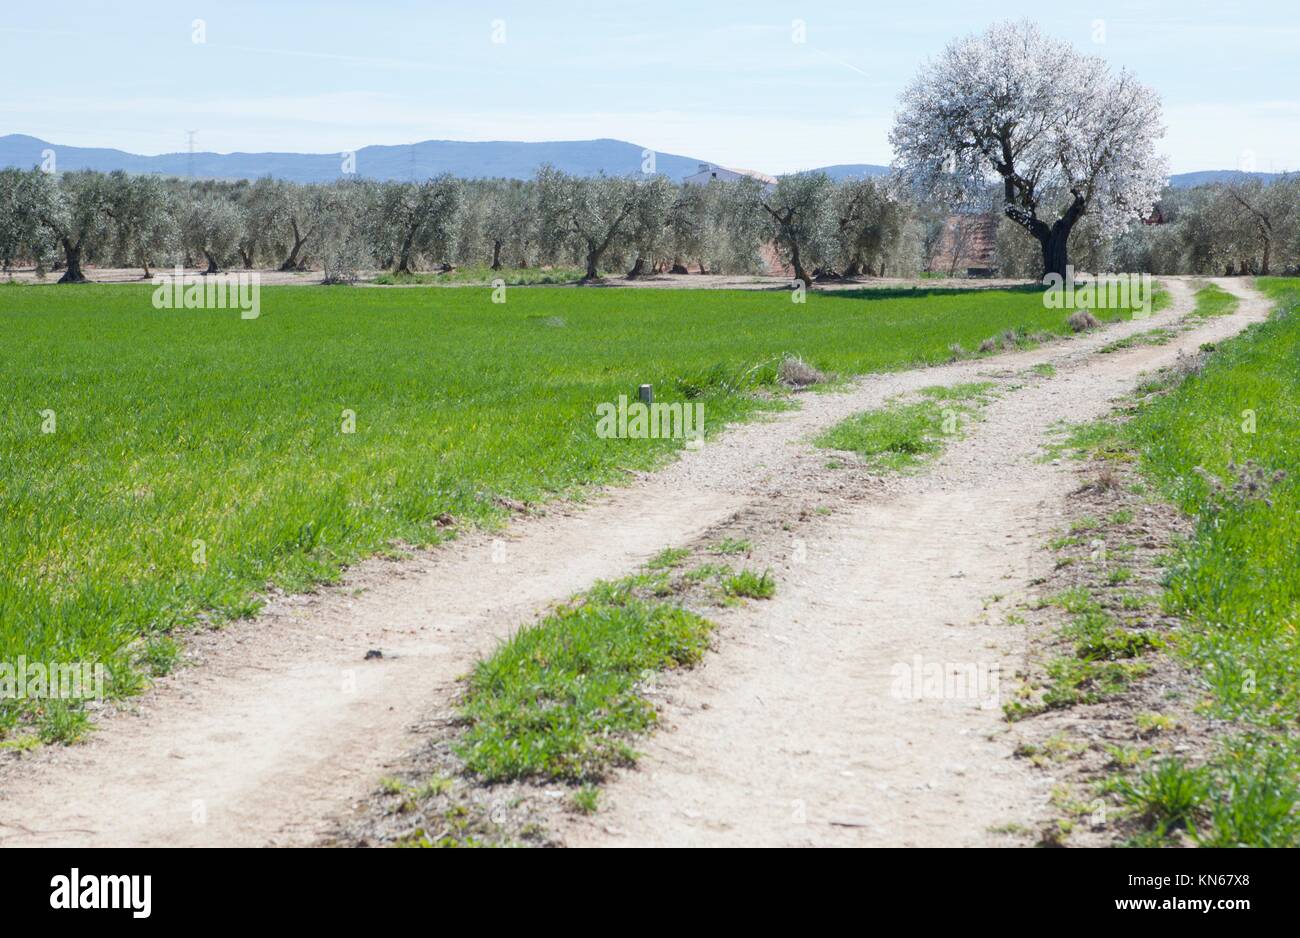 Lonely pear tree in full bloom in the middle of an olive trees cultivation field. Stock Photo